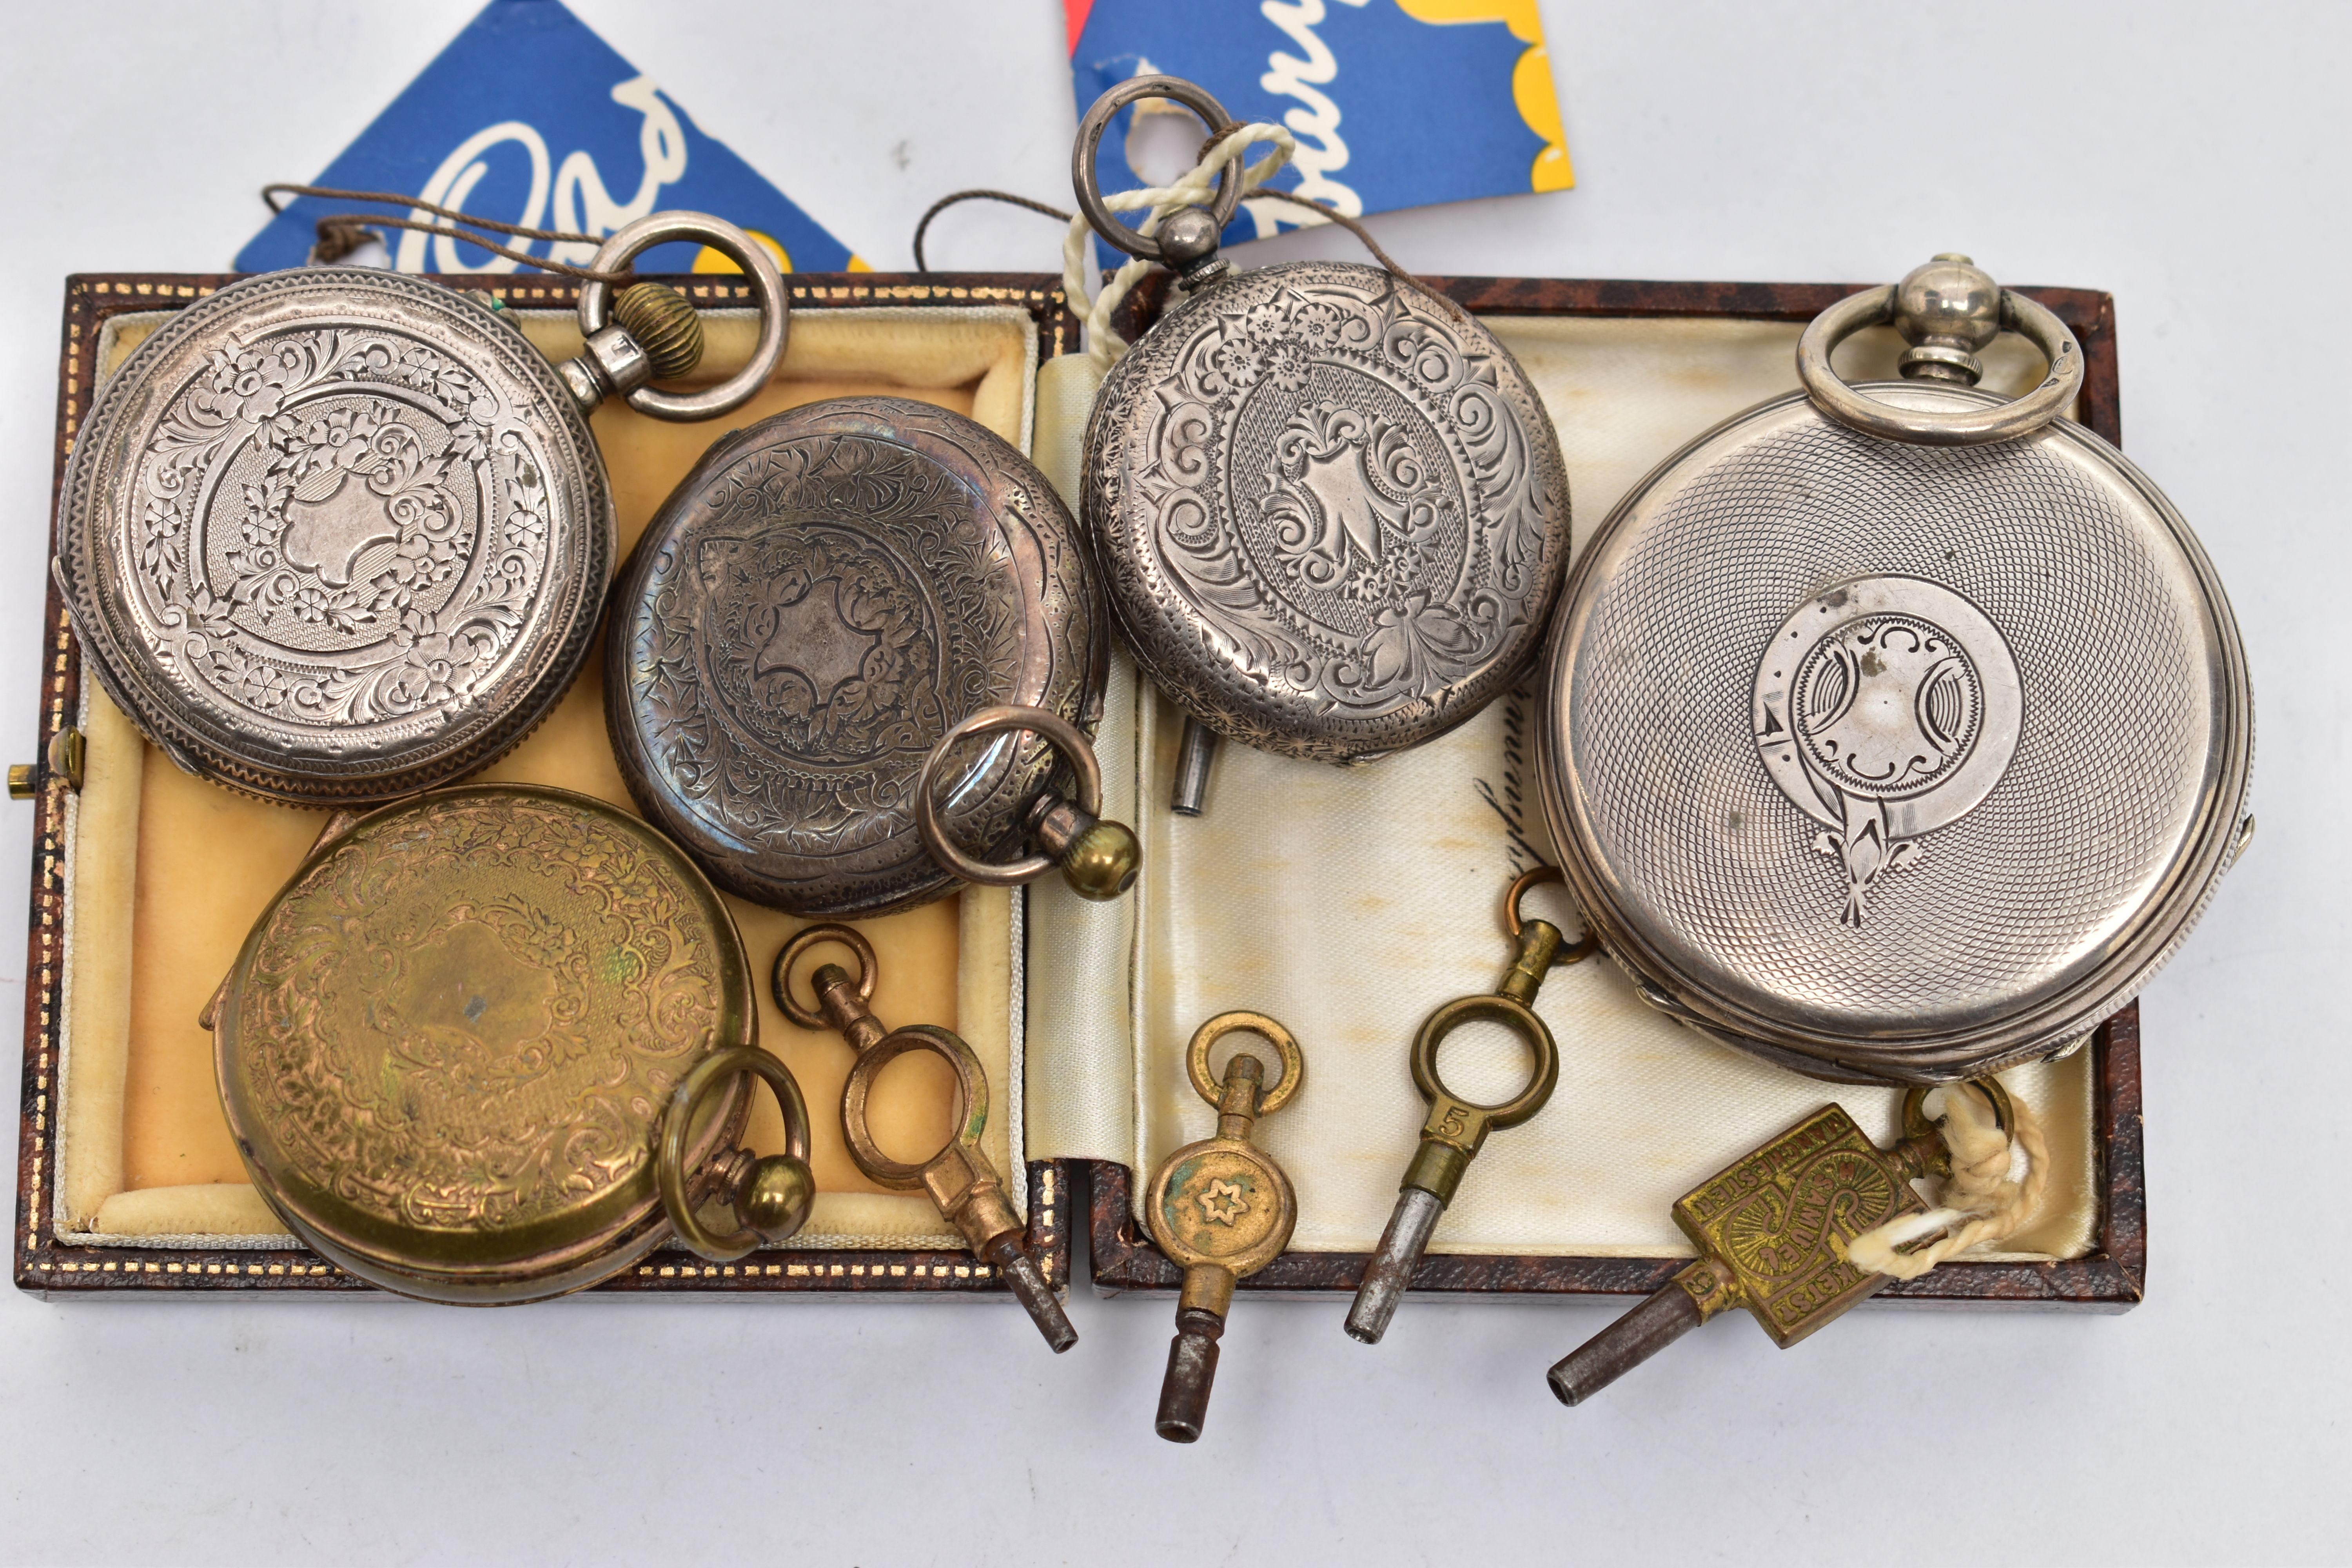 FIVE OPEN FACE POCKET WATCHES, the first a silver cased ladies pocket watch, hand wound movement, - Image 4 of 5